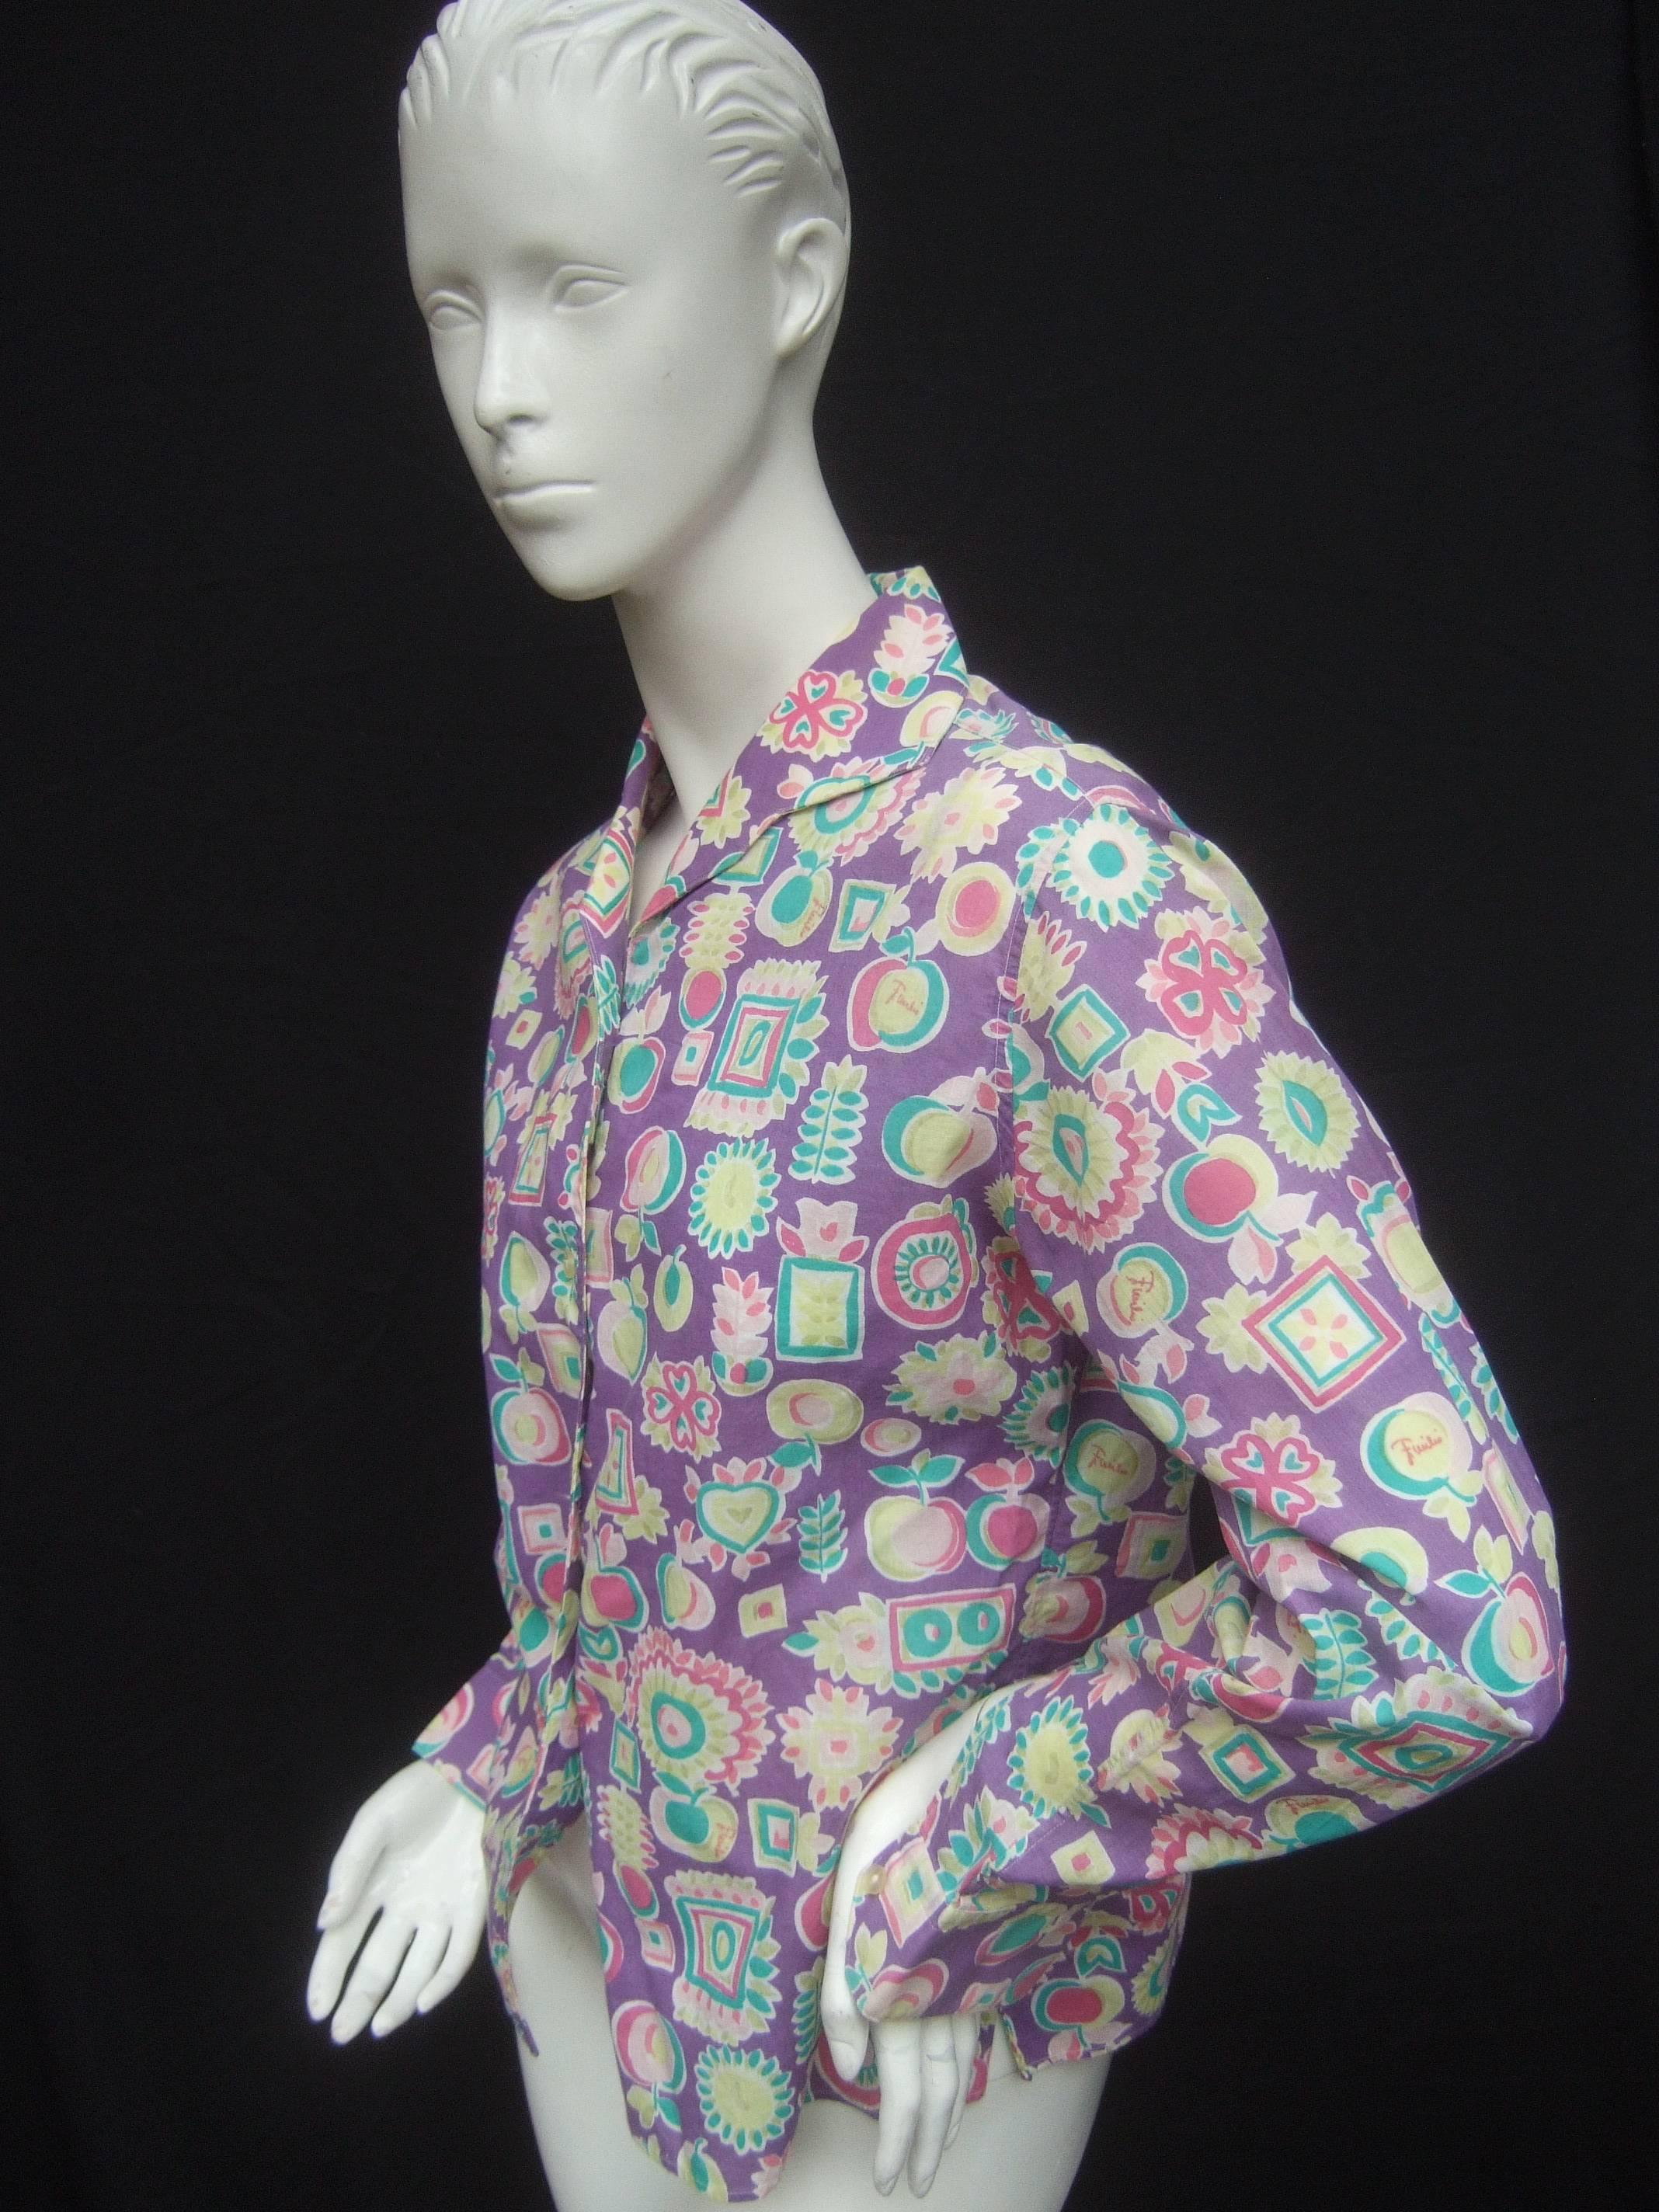 Gray Emilio Pucci Cotton Pastel Print Blouse Made in Italy c 1970 For Sale